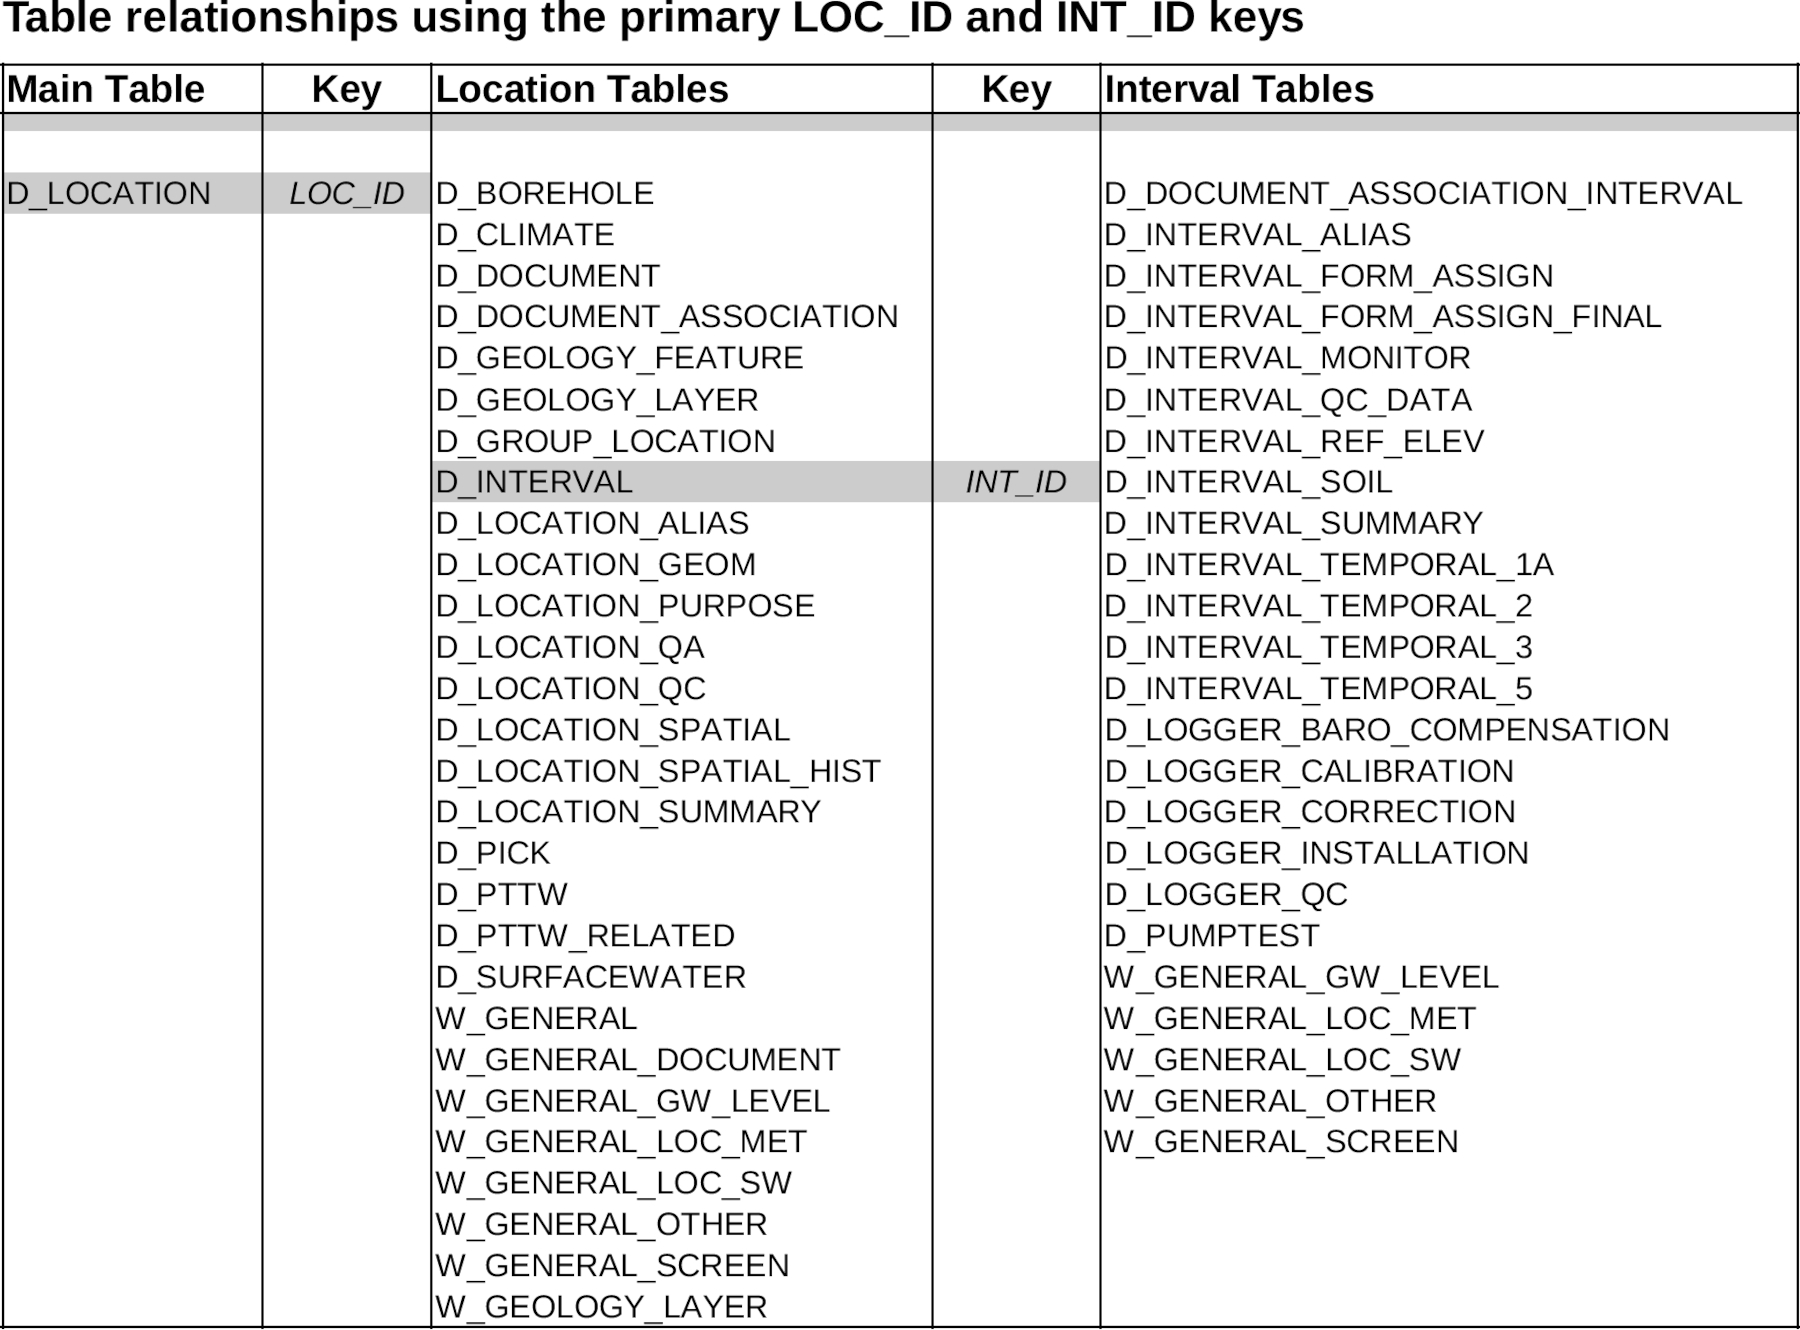 Table 2.2.1 Table relationships between the data (D_) and web (W_) tables
using LOC_ID and INT_ID keys